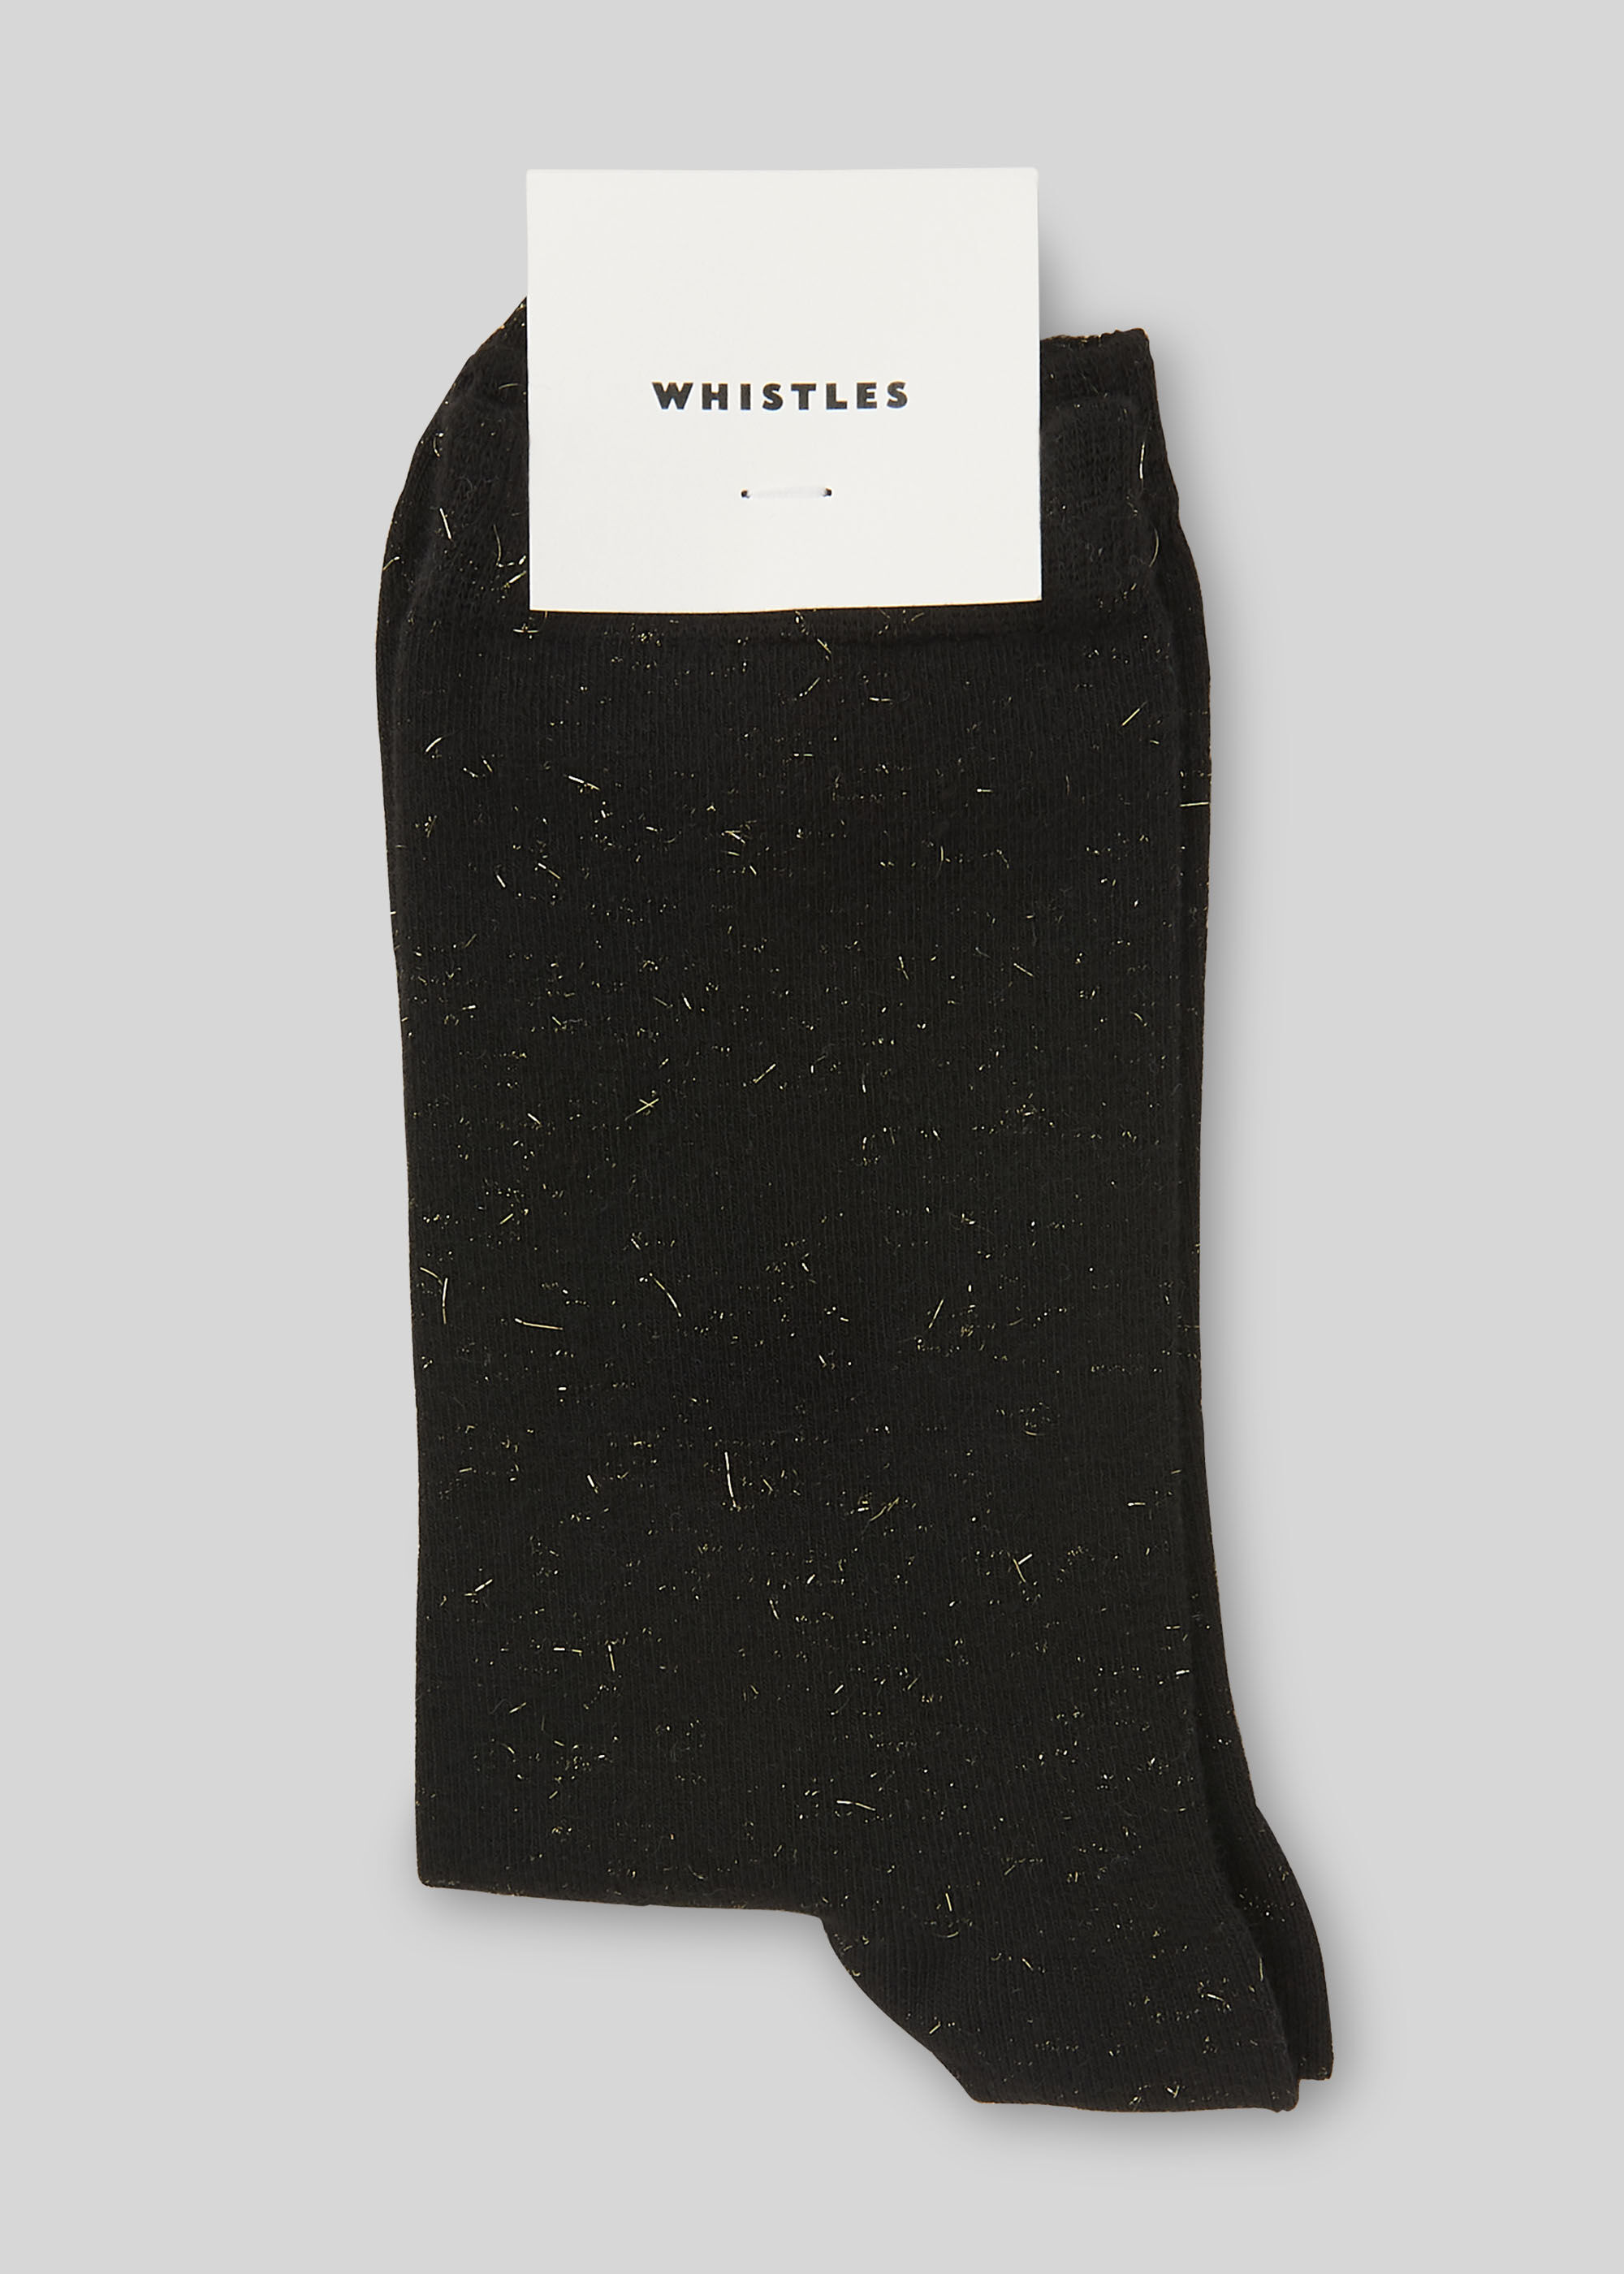 whistles sock boots